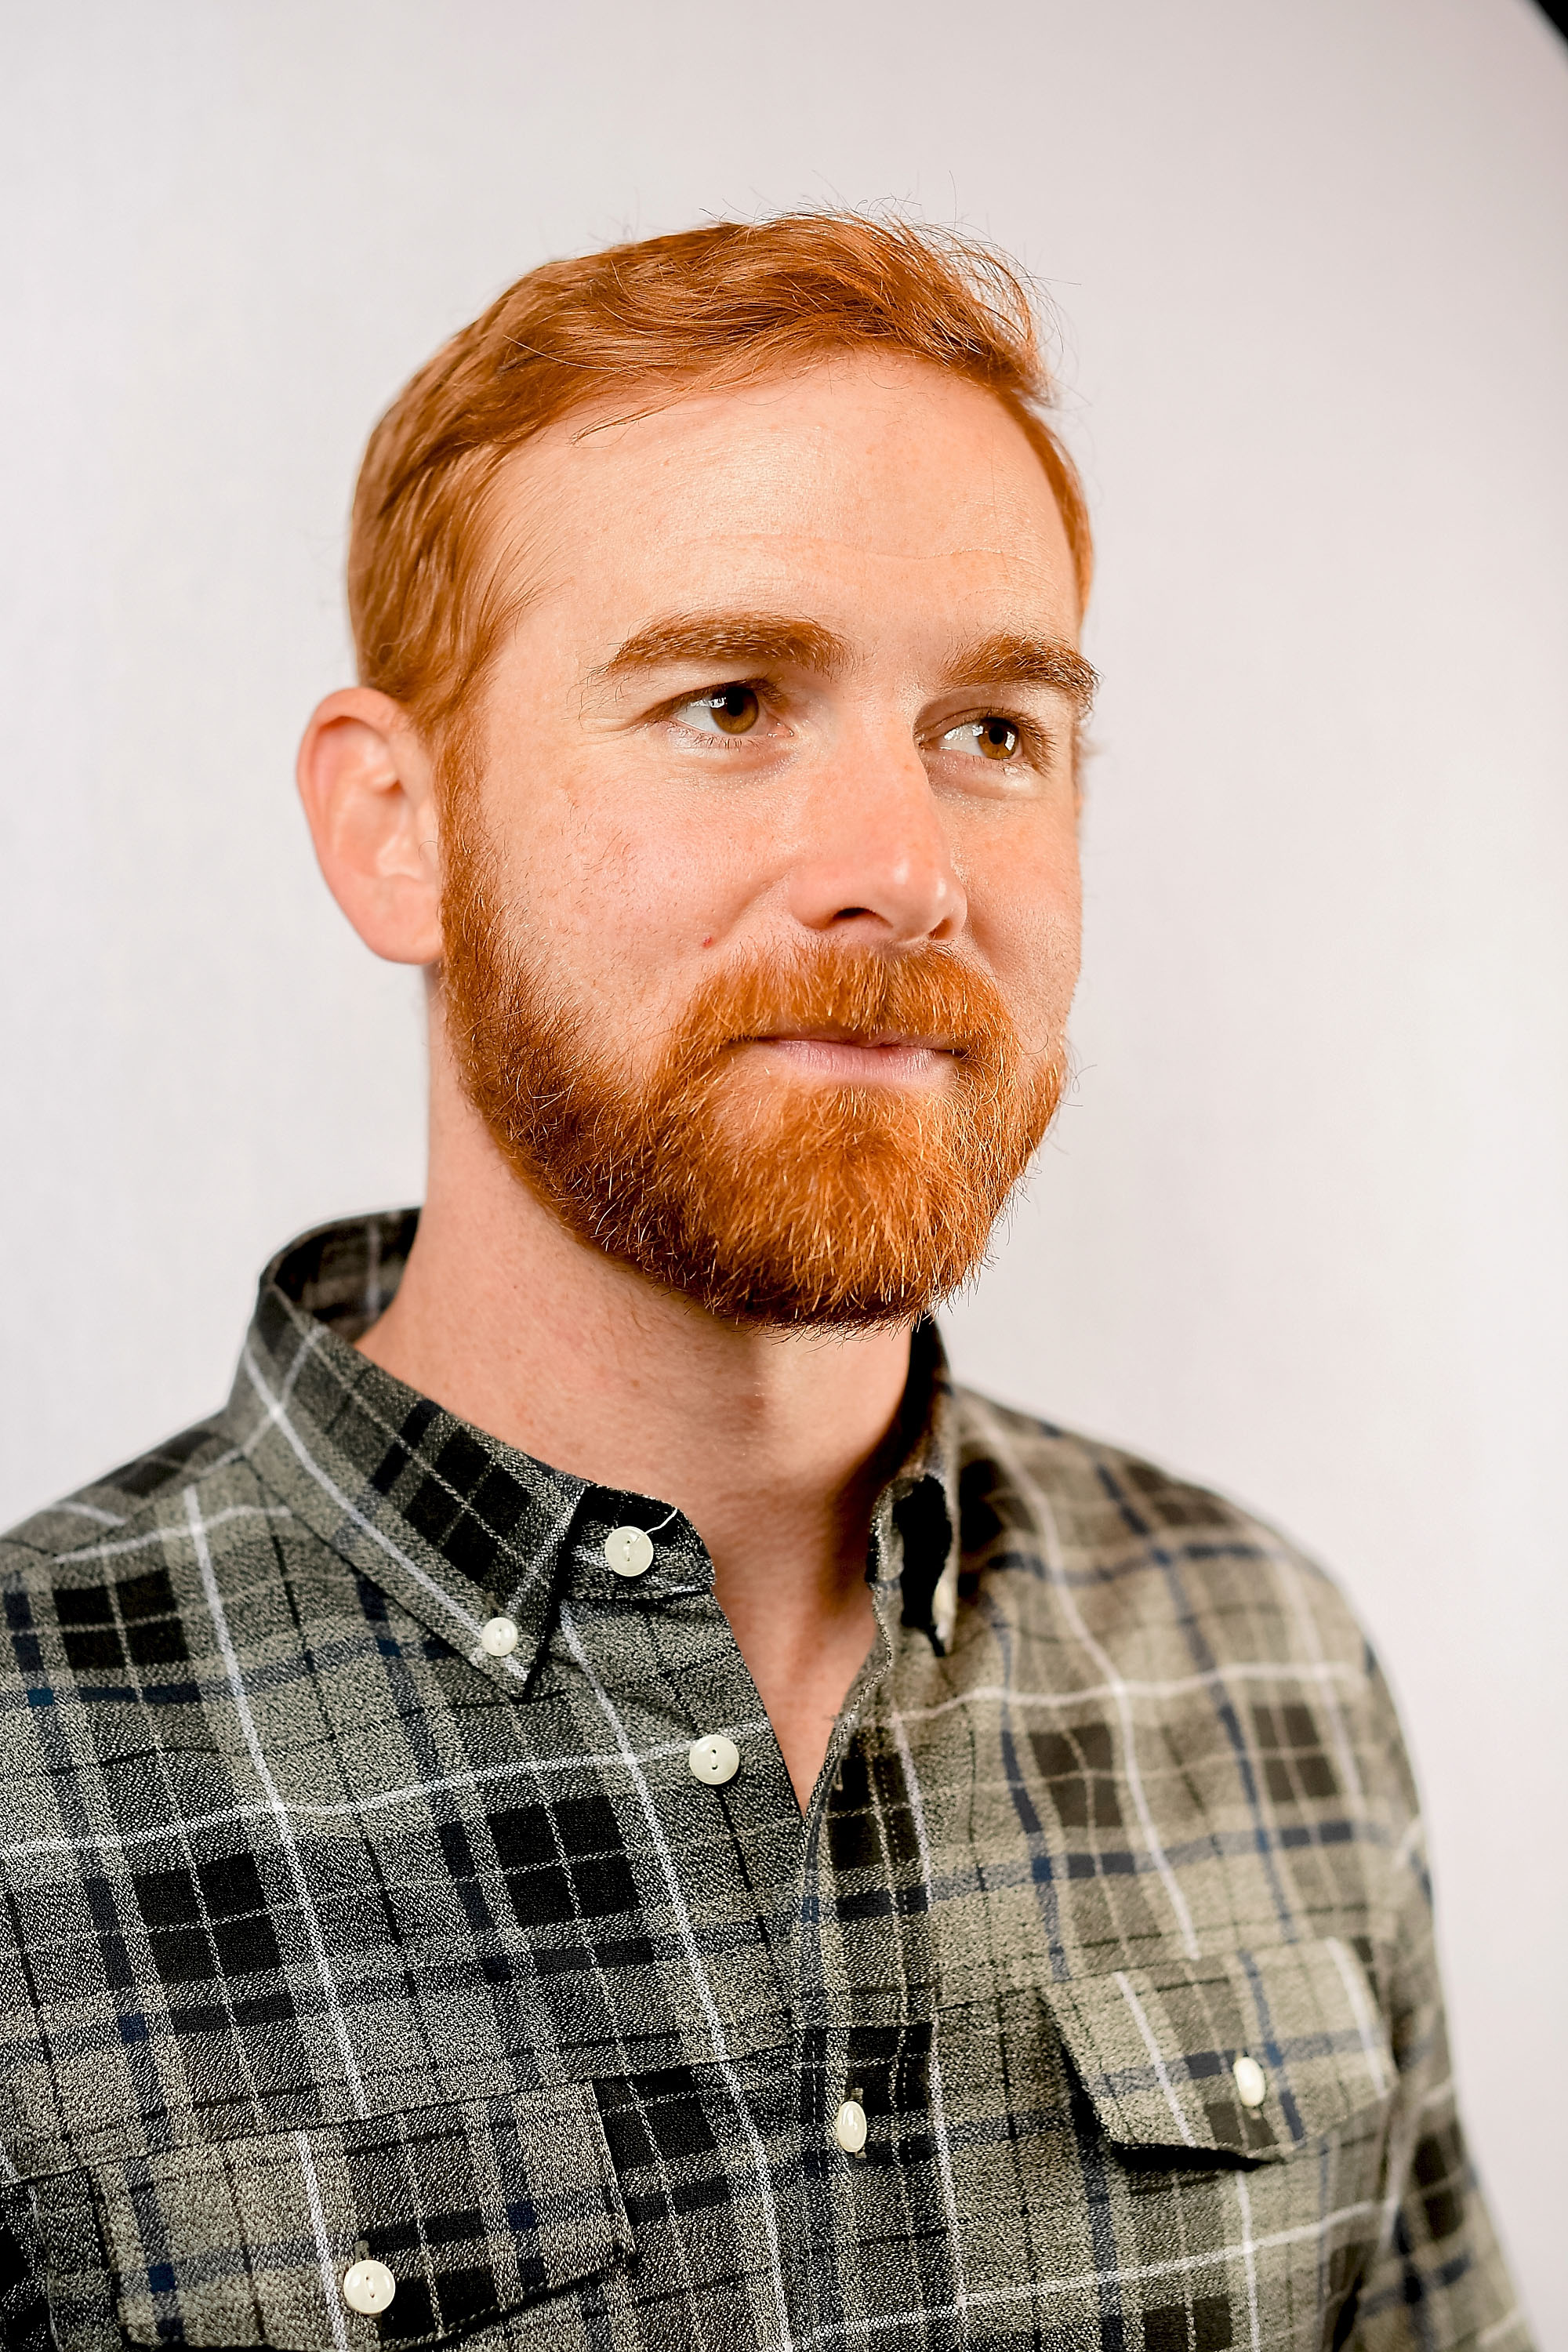 Andrew Santino 5 Fast Facts You Need to Know